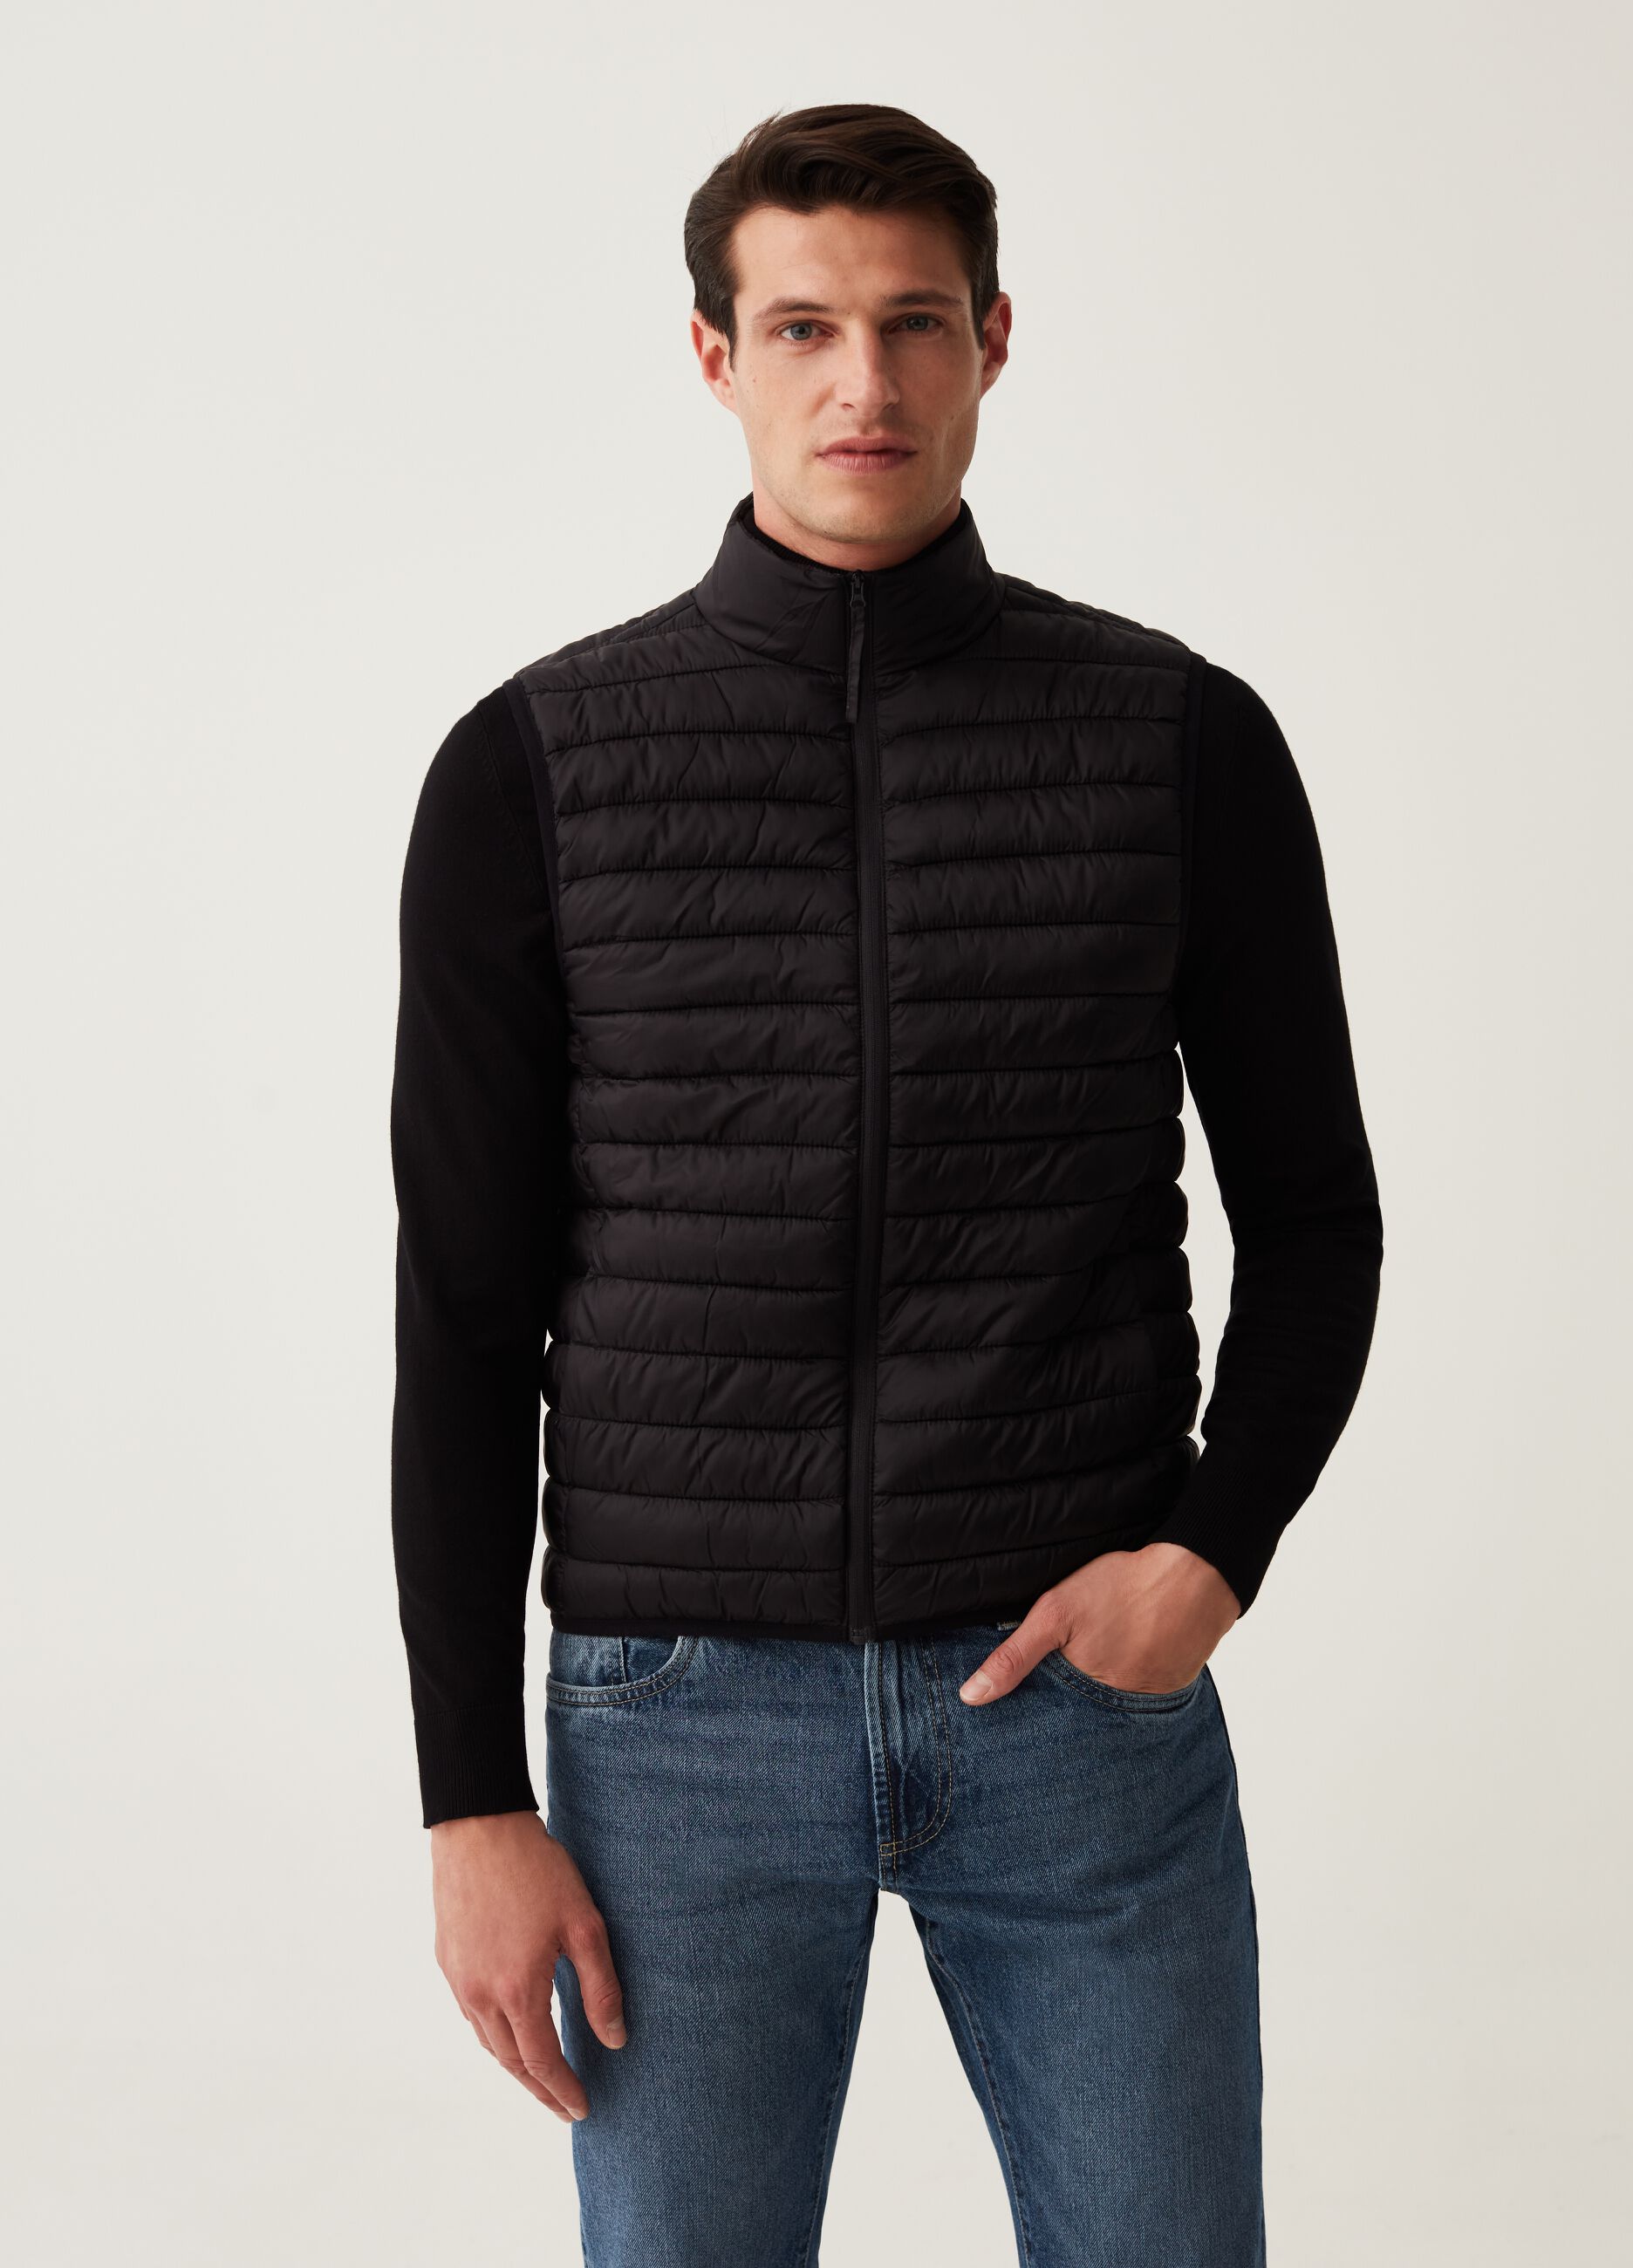 Ultralight gilet with high neck_1